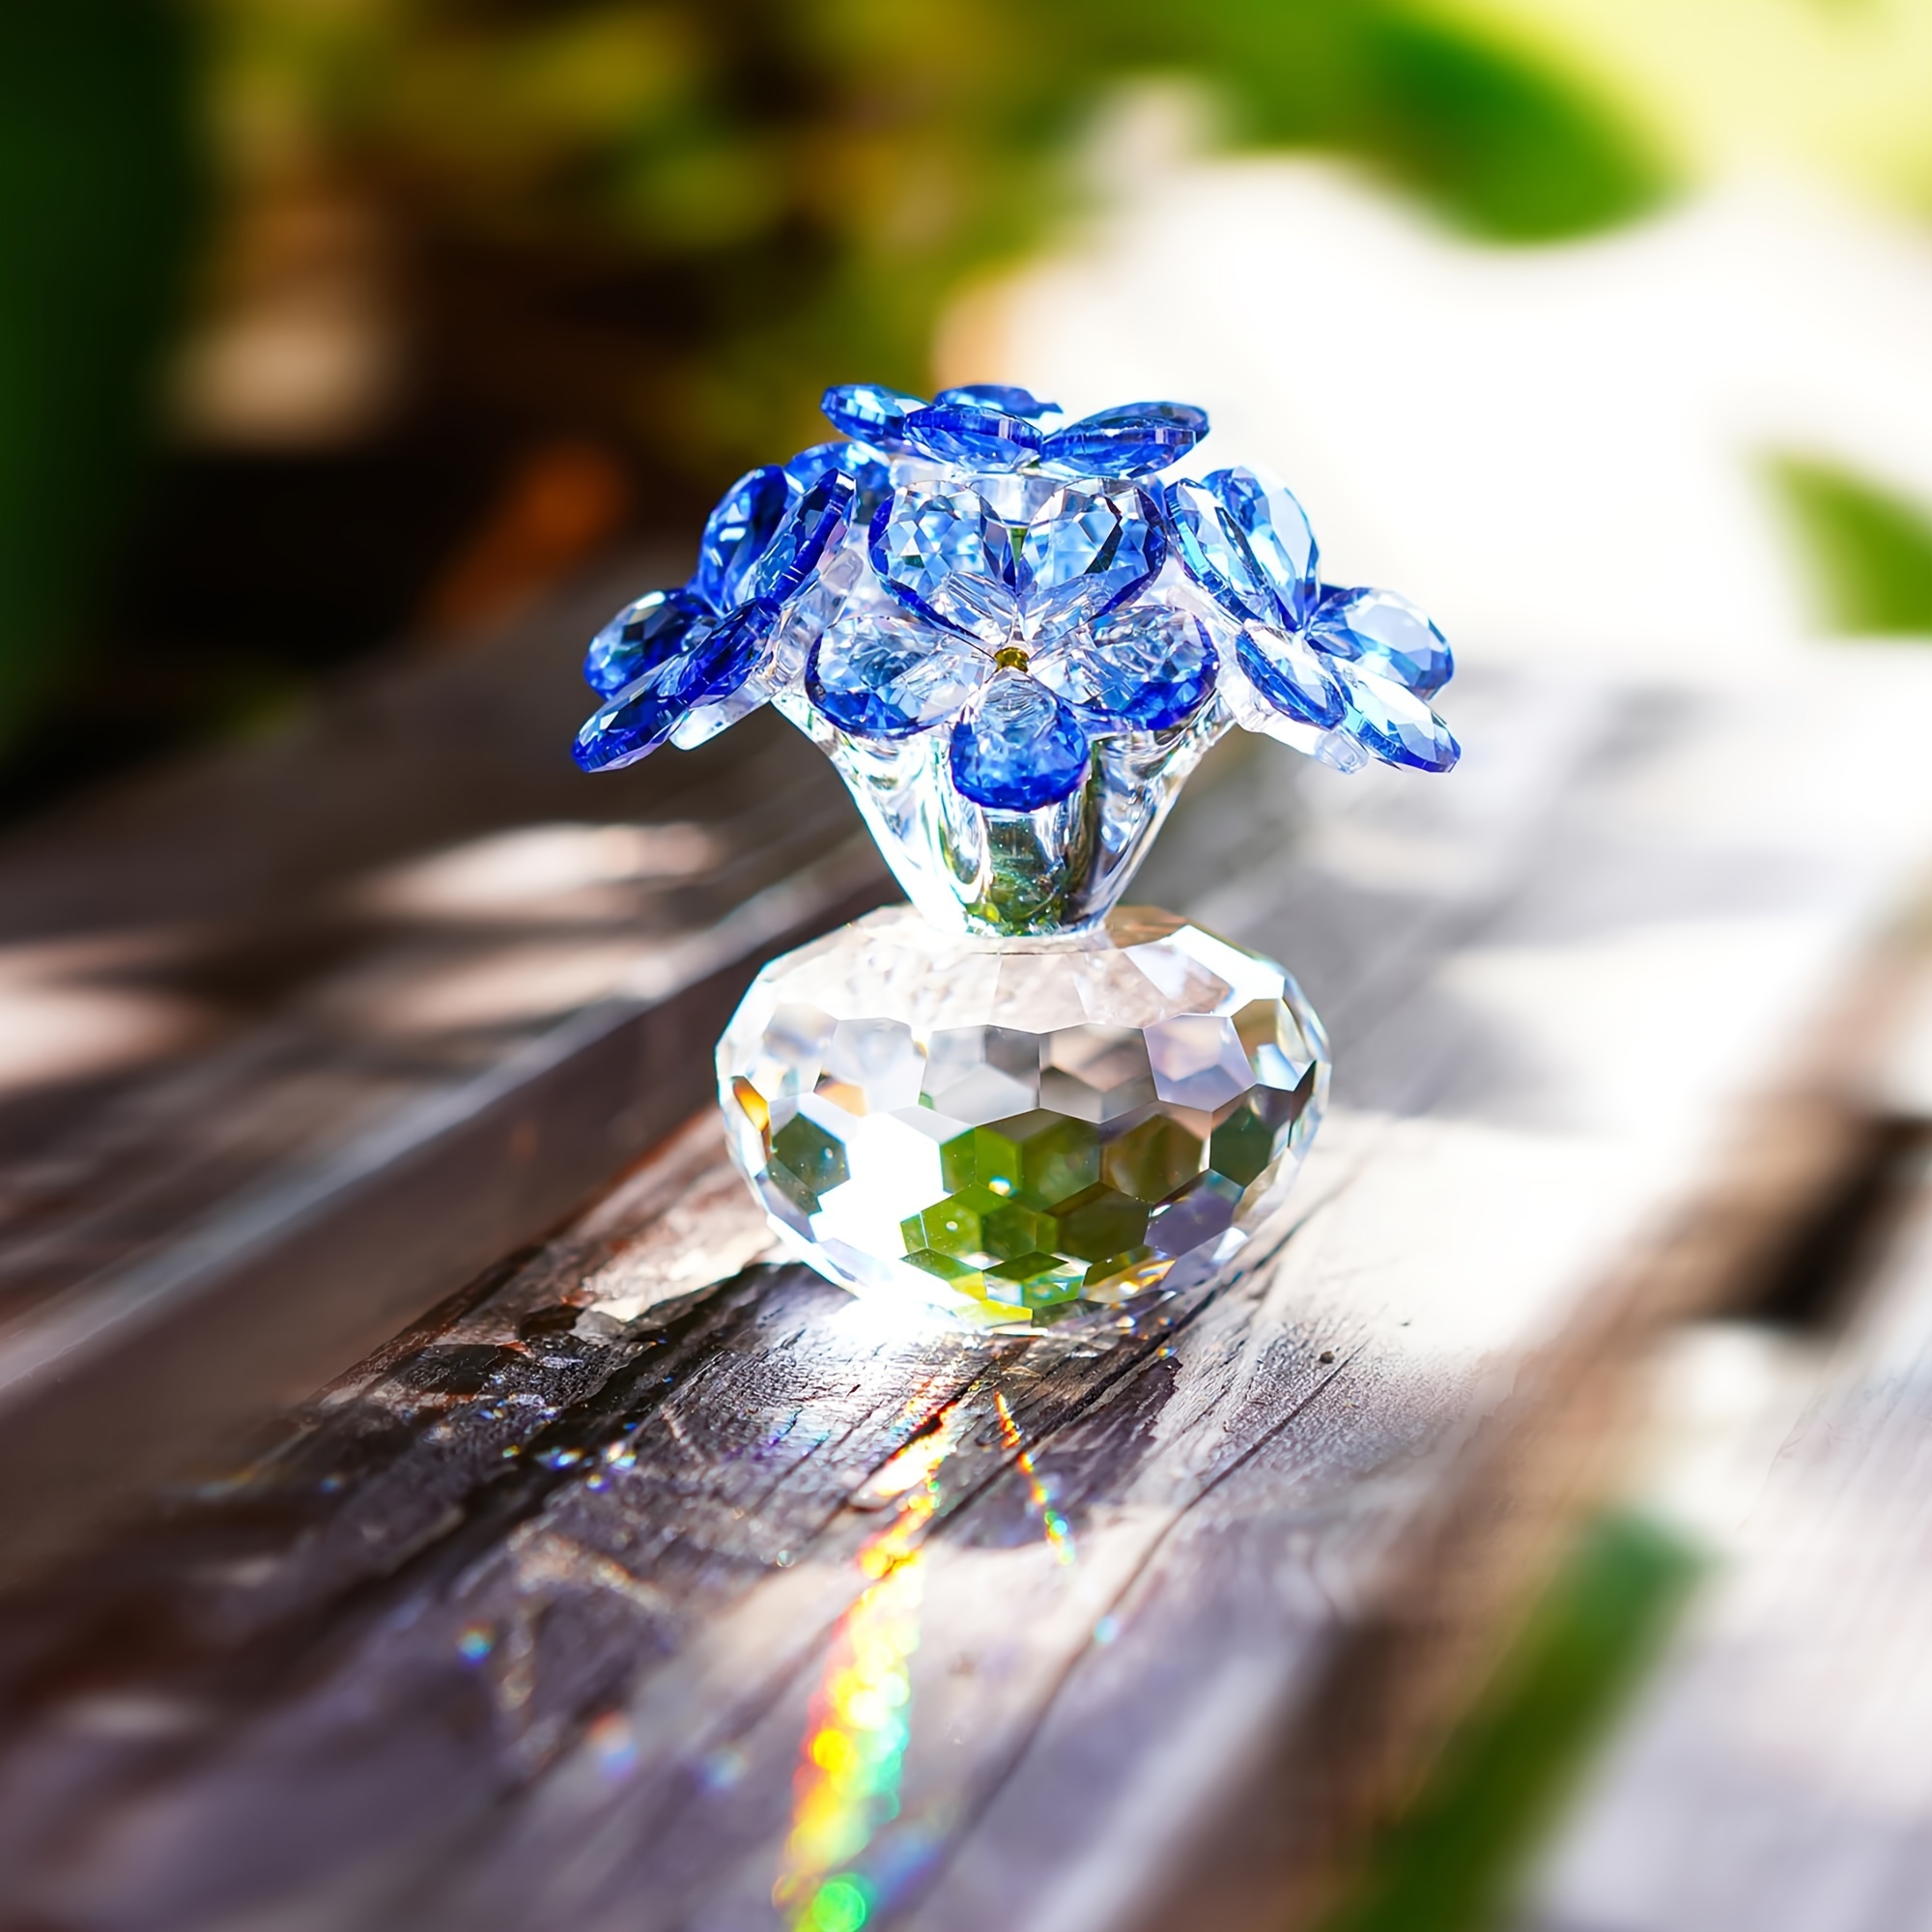 

wife's Cherished" Forget Me Not Blue Crystal Flower Figurine - Perfect Gift For Mom, Wife, Girlfriend | Elegant Glass Ornament For Home & Office Decor